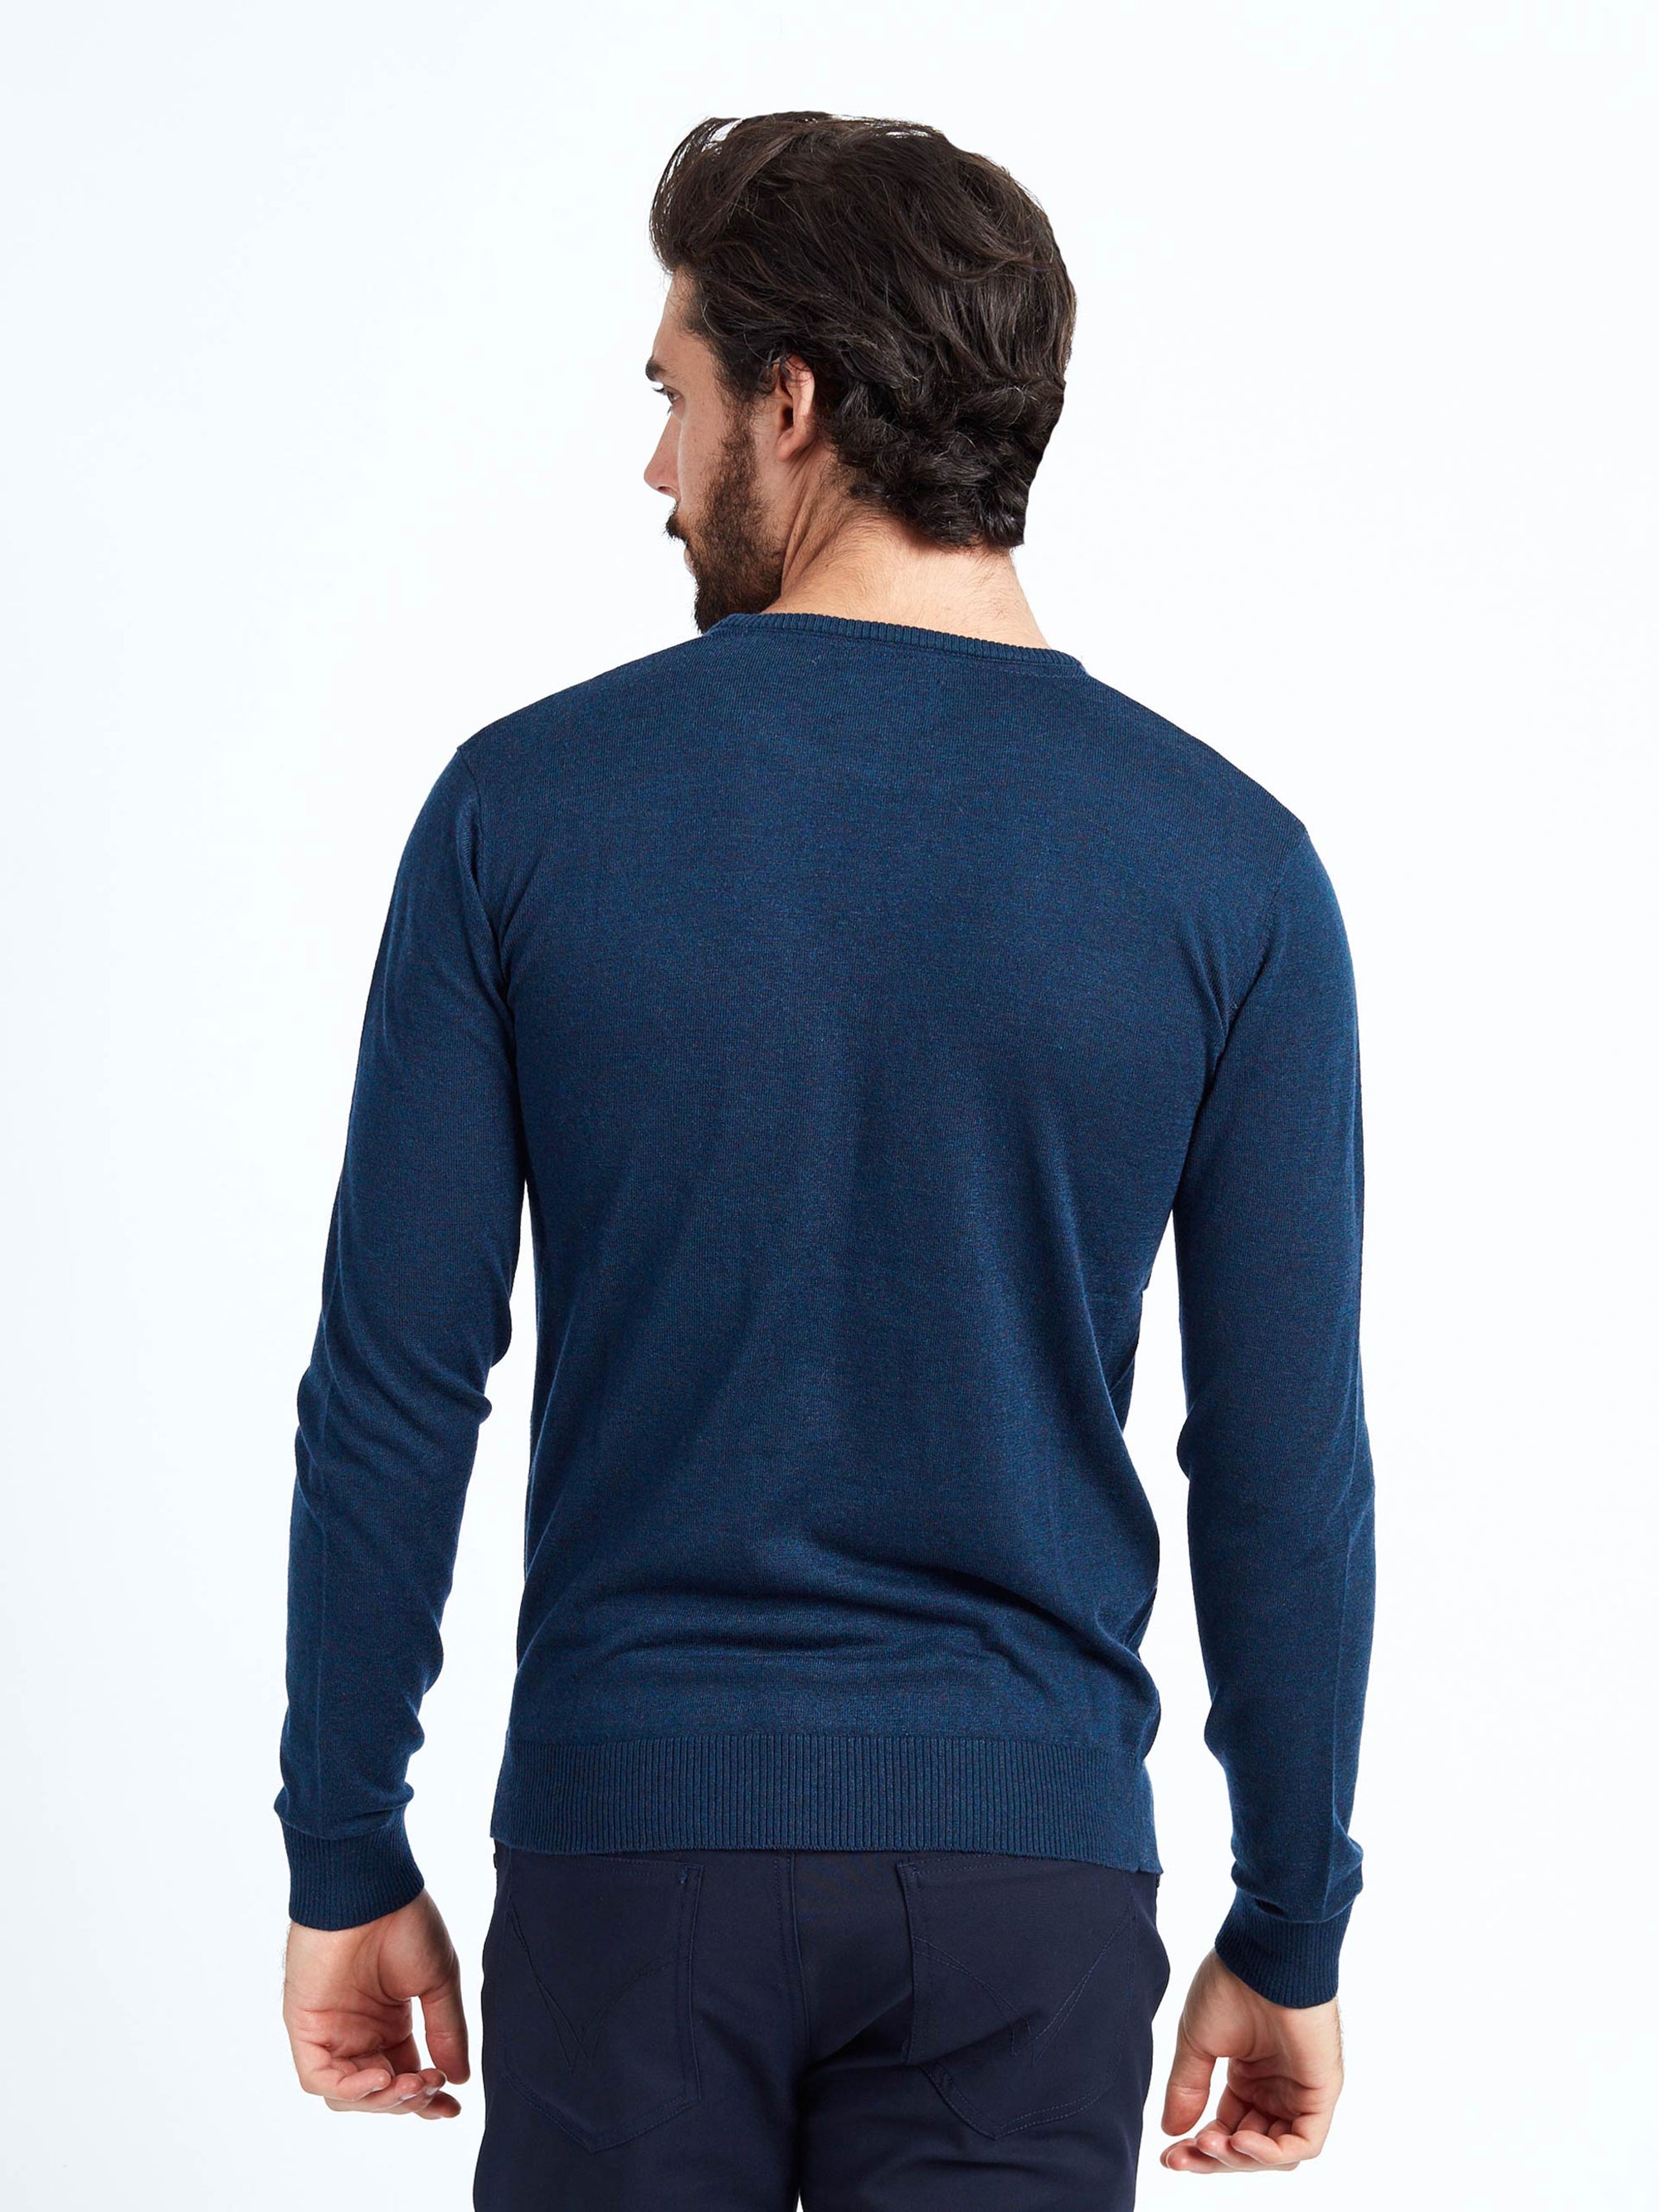 Regular fit wool blend navy long sleeve knitted crew neck mish mash